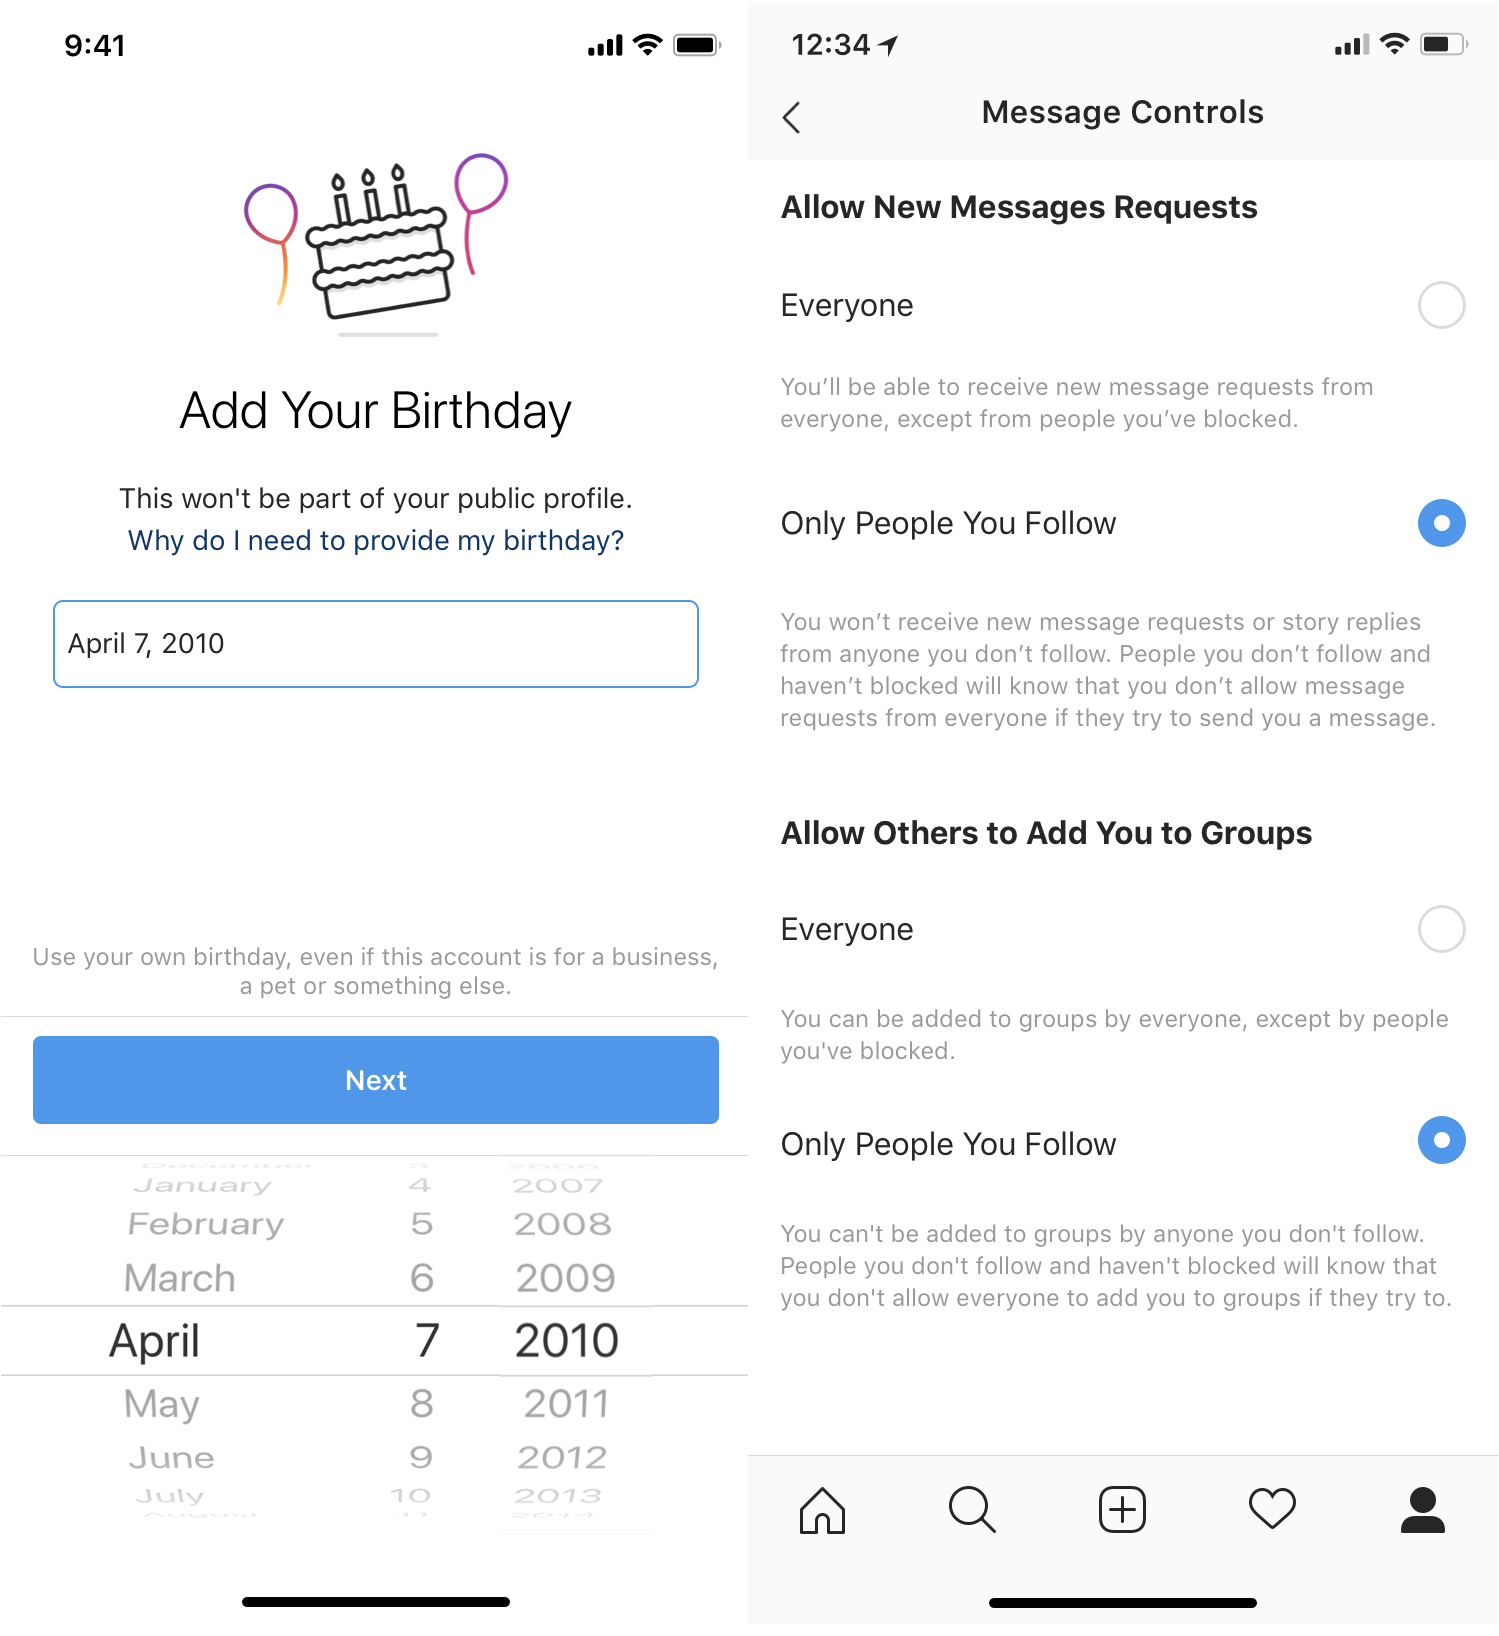 Instagram now requires your age at sign-up and has new messaging controls